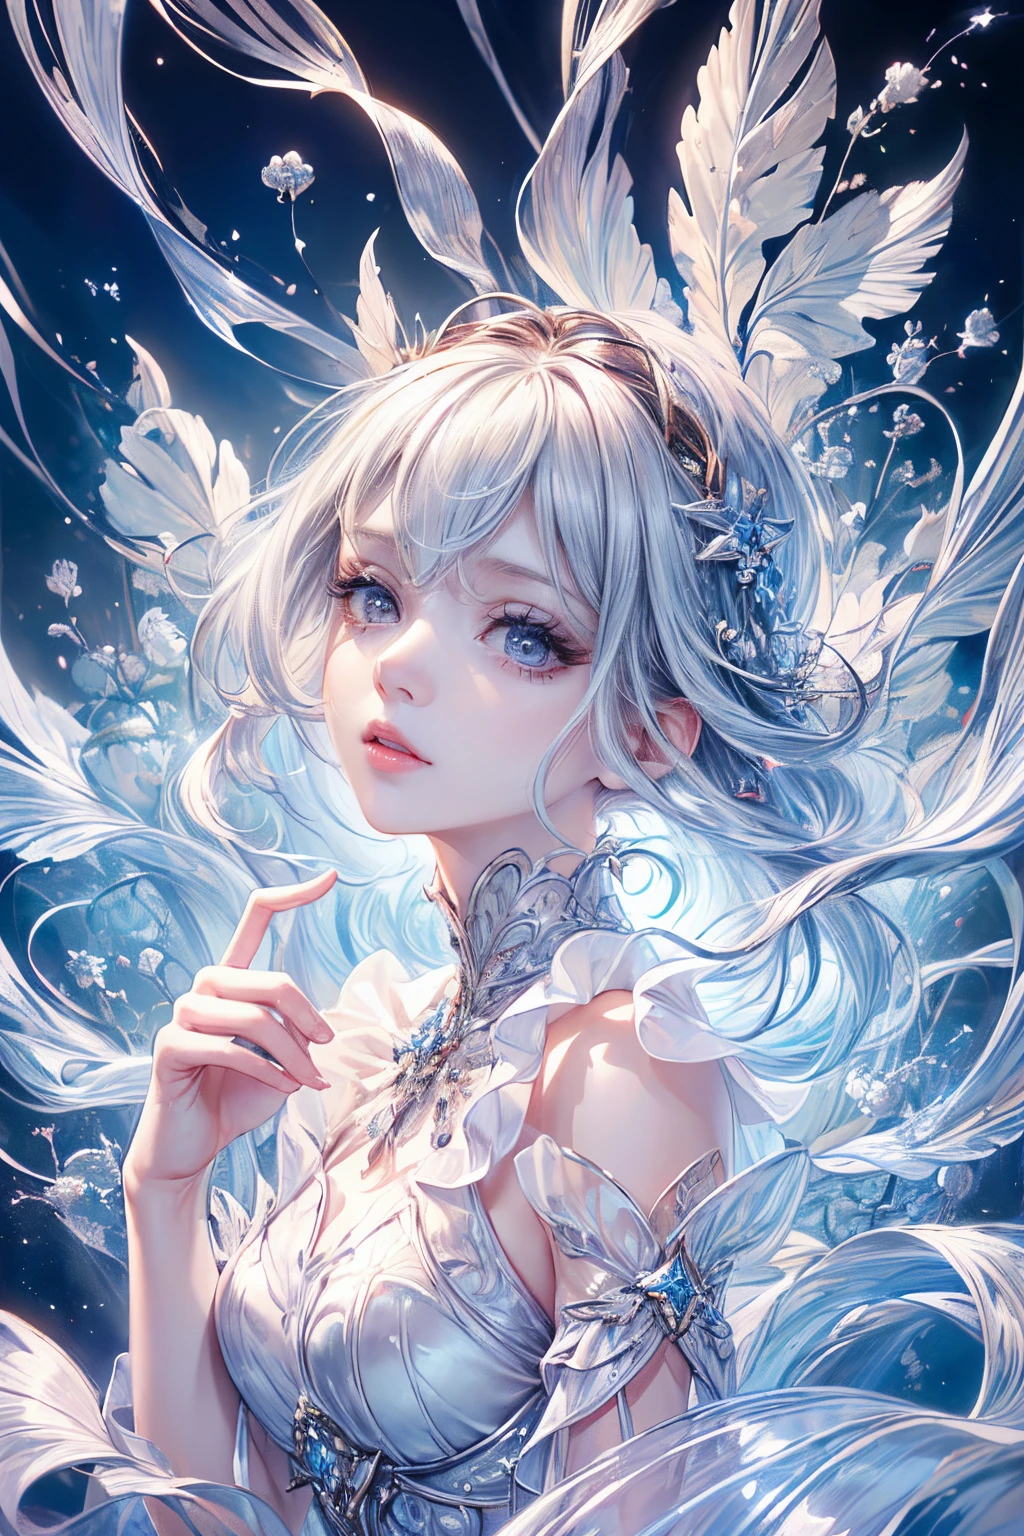 (Best quality at best, 8K, CG, Beautiful and detailed upper body, Solitude, Thumb girl, Transparent court dress, florest background, Complex facial features, long, floated hair, almond eyes, exquisite eye makeup, long eyelashes fluttering, Blink big eyes, starrysky, Delicate lip detailing, Soft and harmonious style)